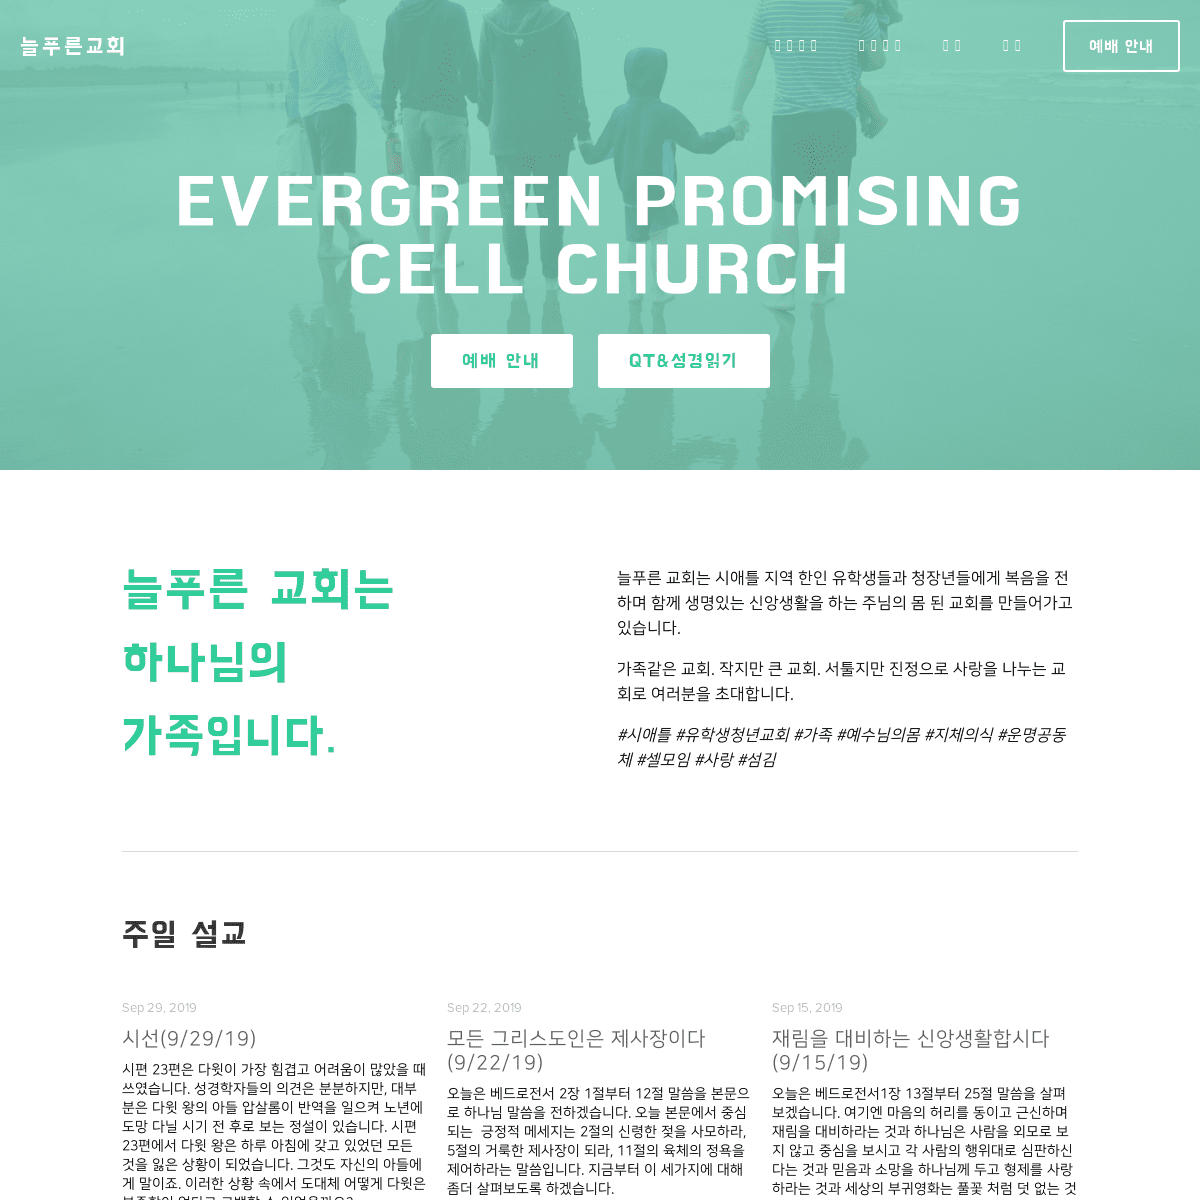 A complete backup of evergreenpromising.org